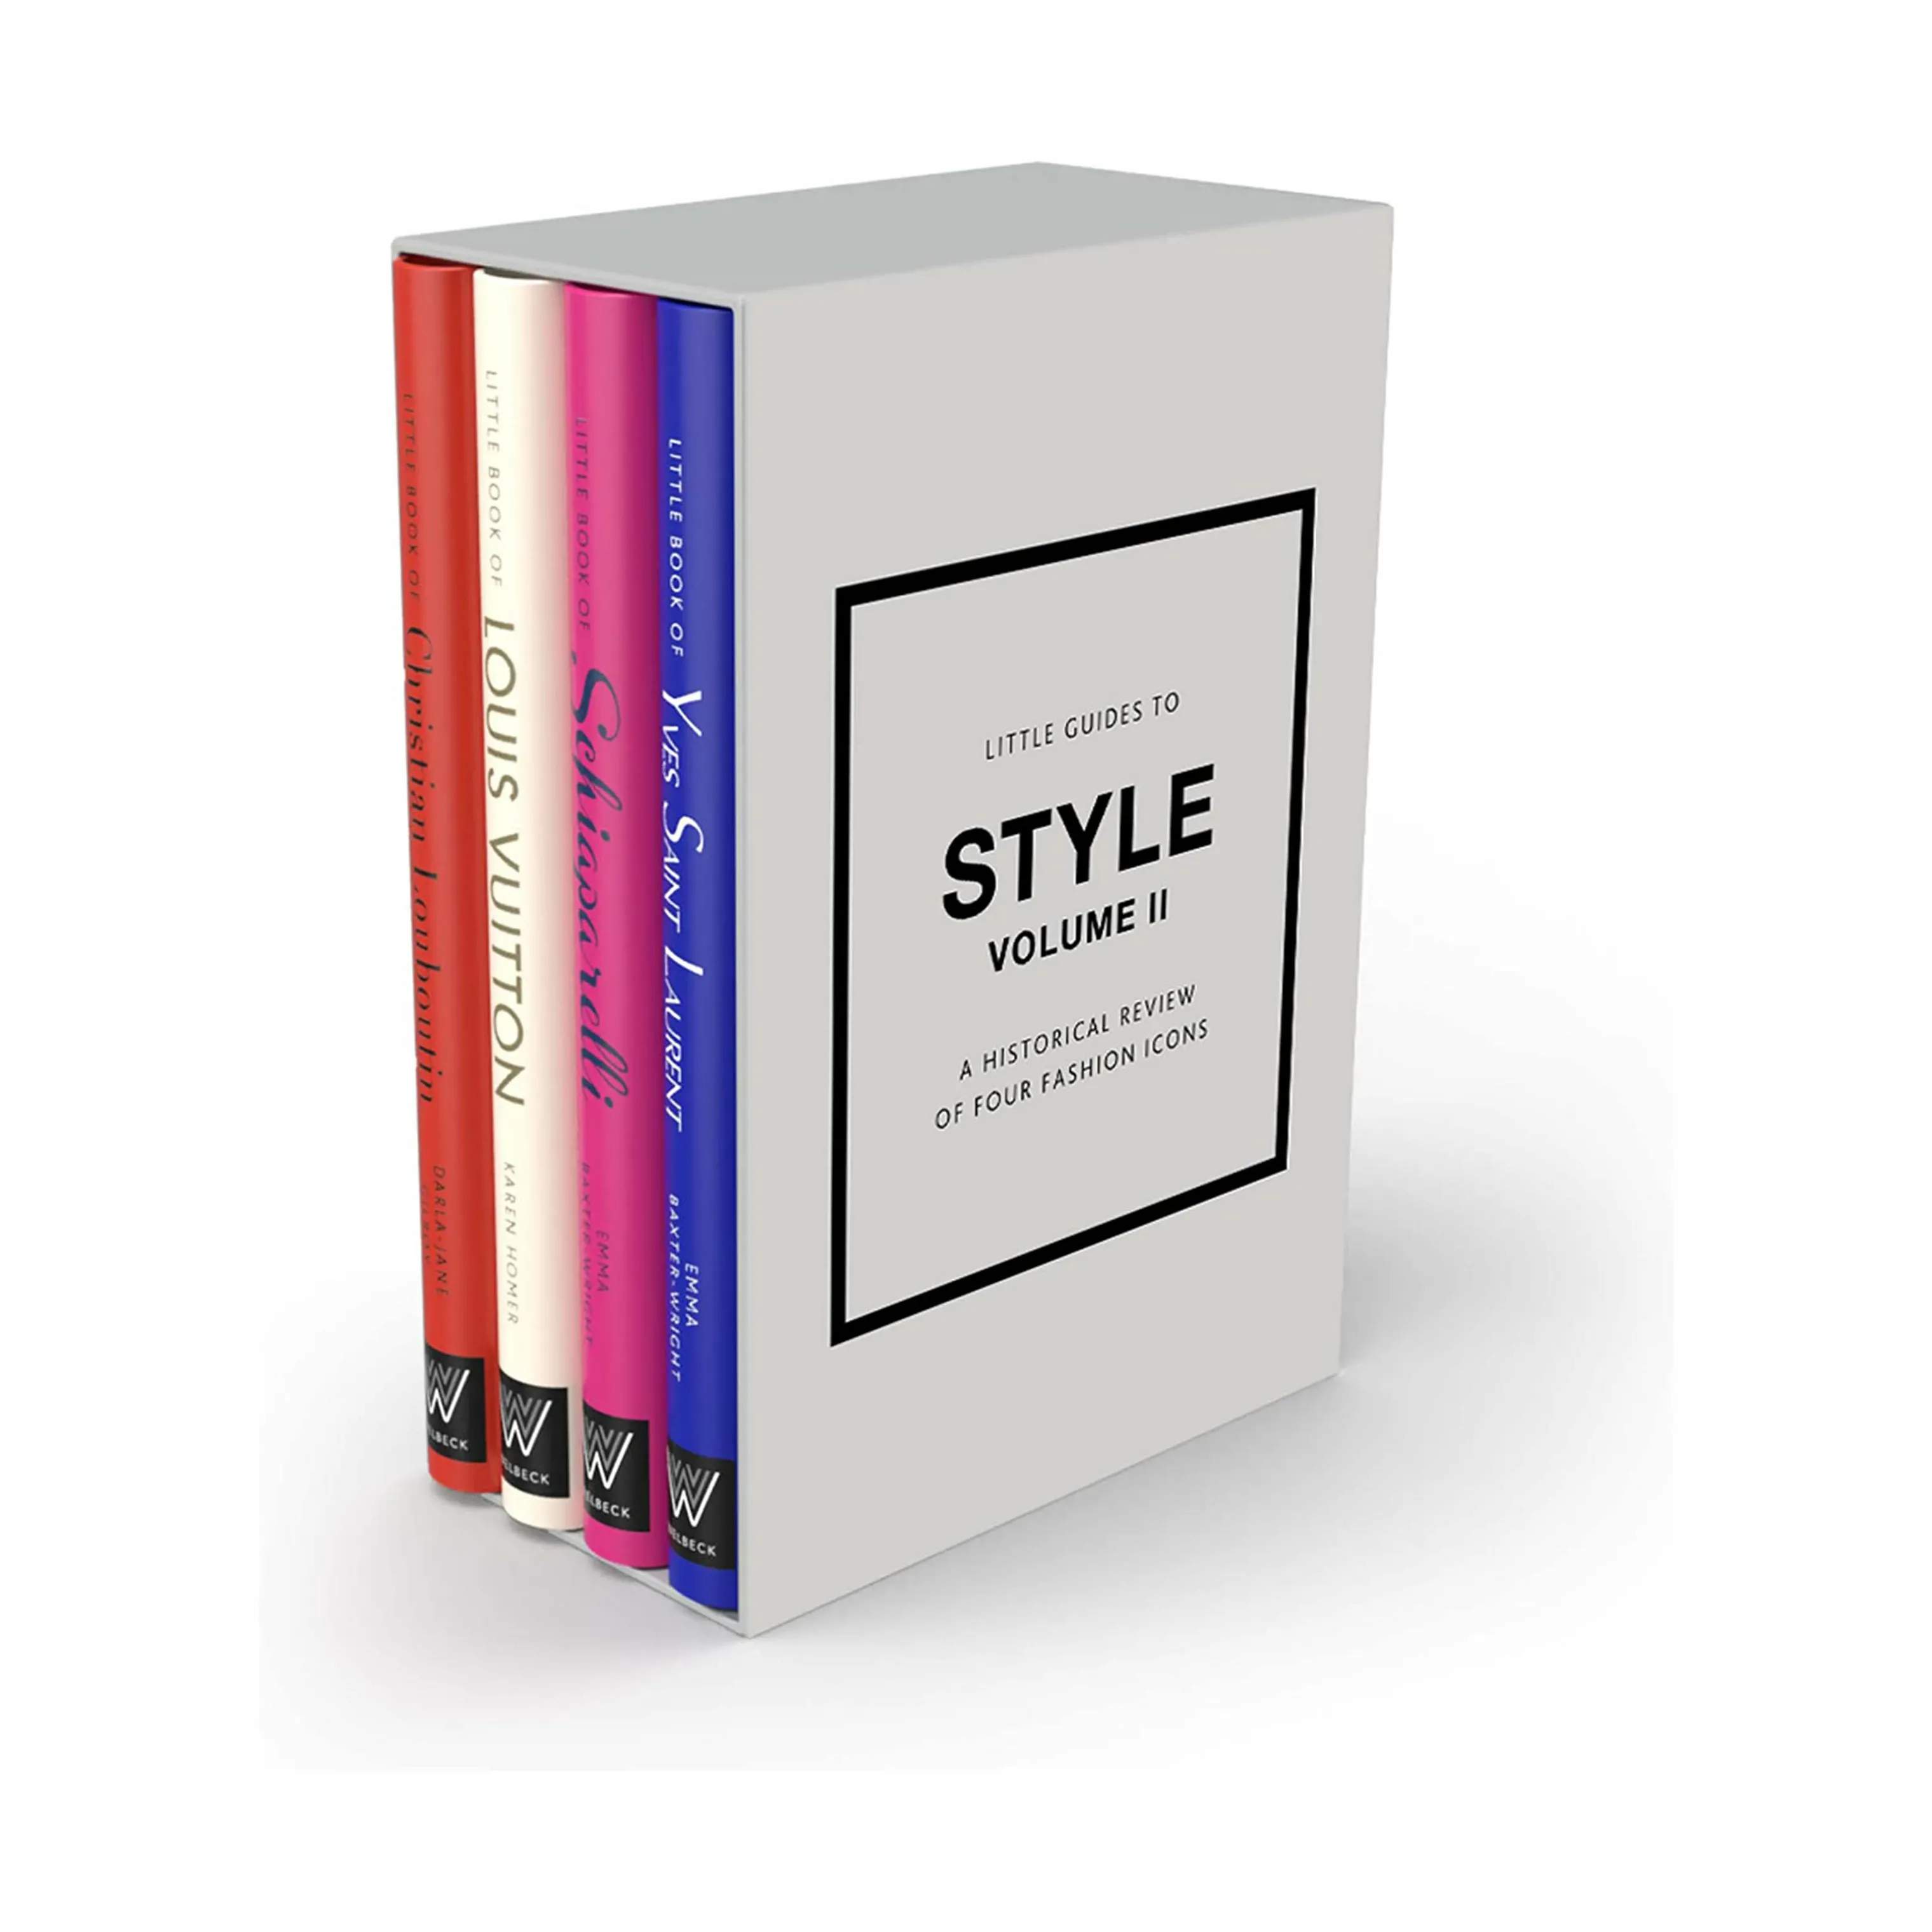 Little Guides to Style Vol, II